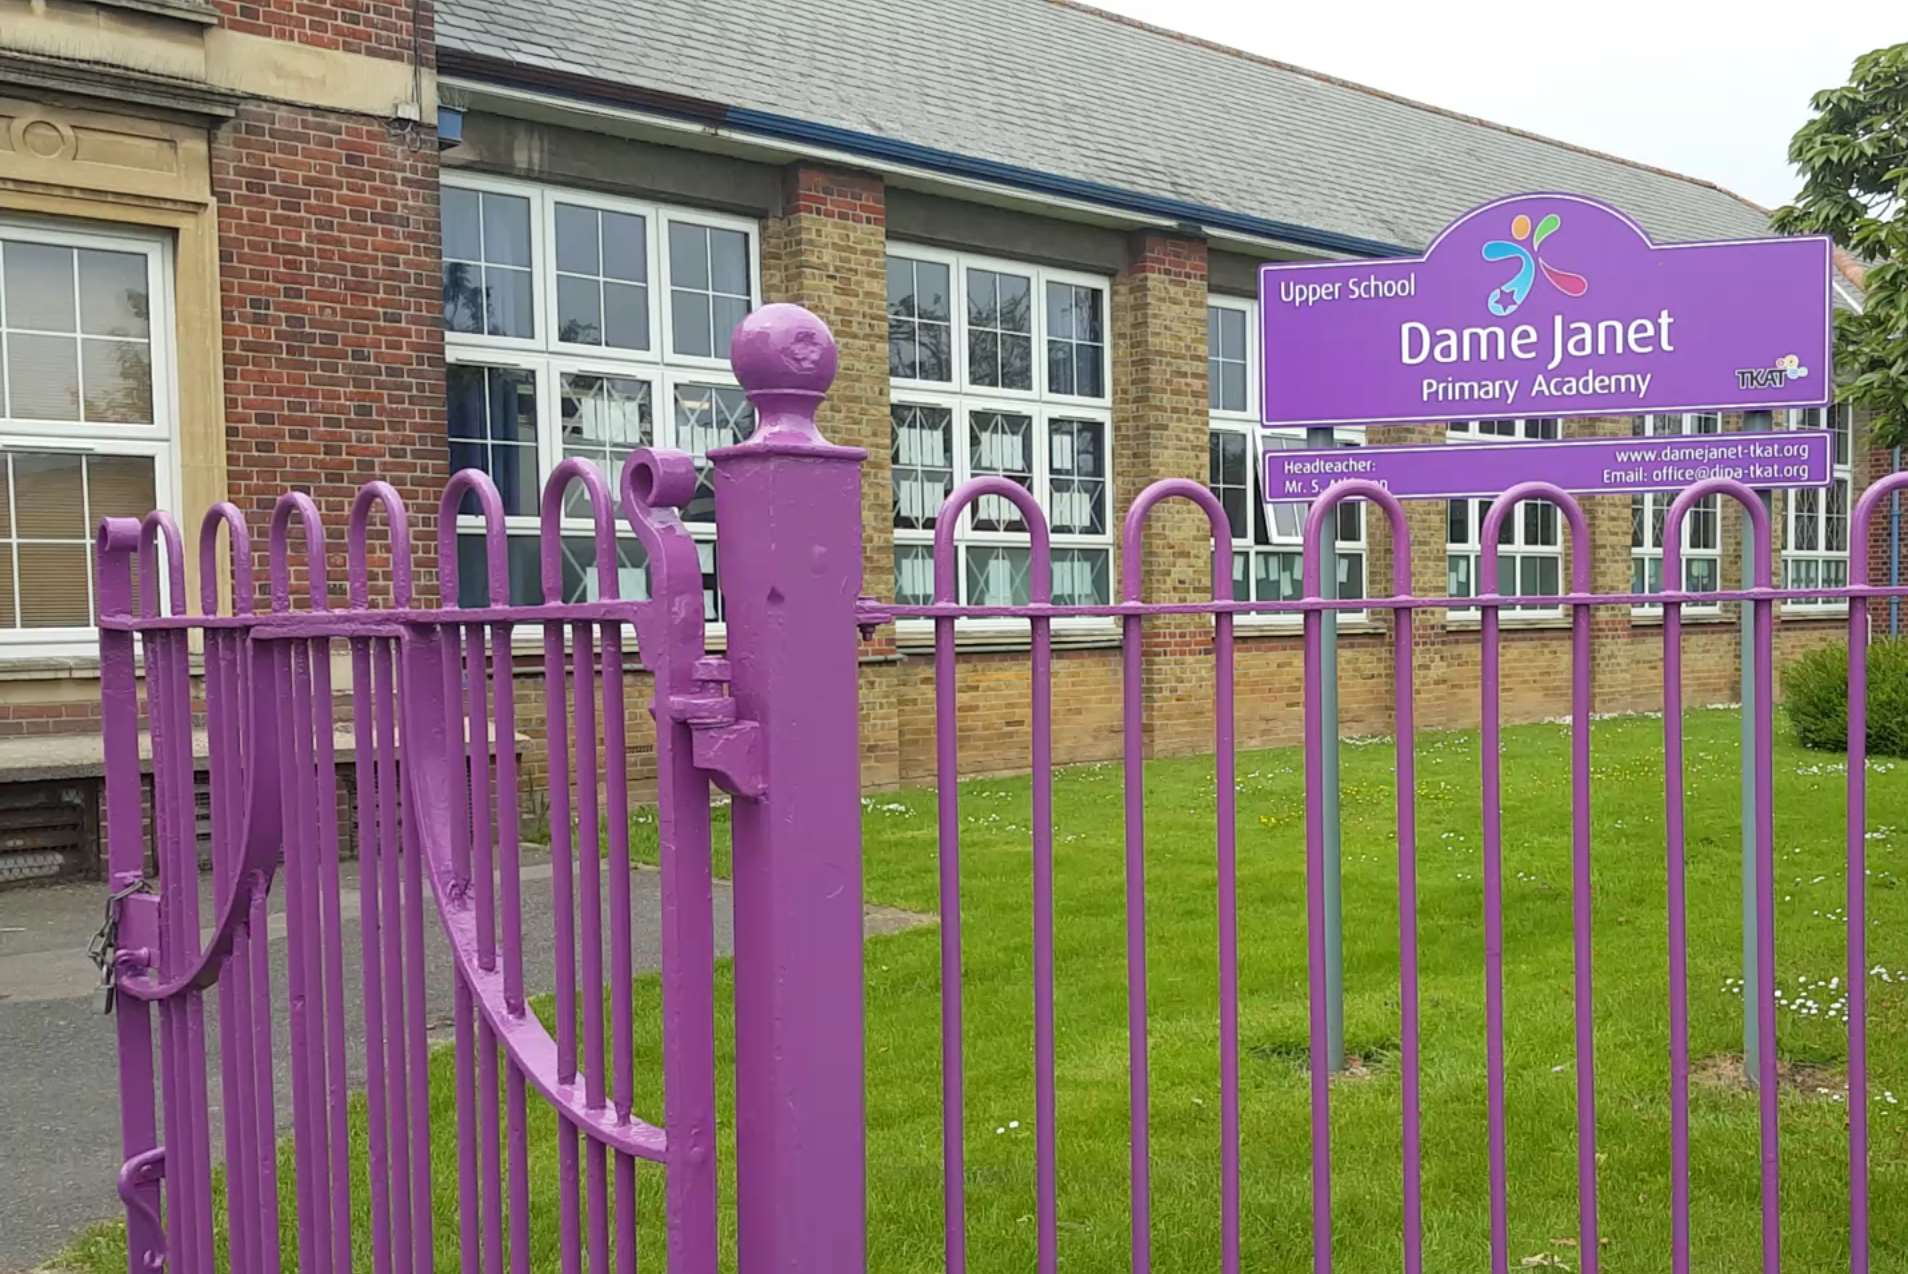 Dame Janet Primary Academy was evacuated due to a bomb threat